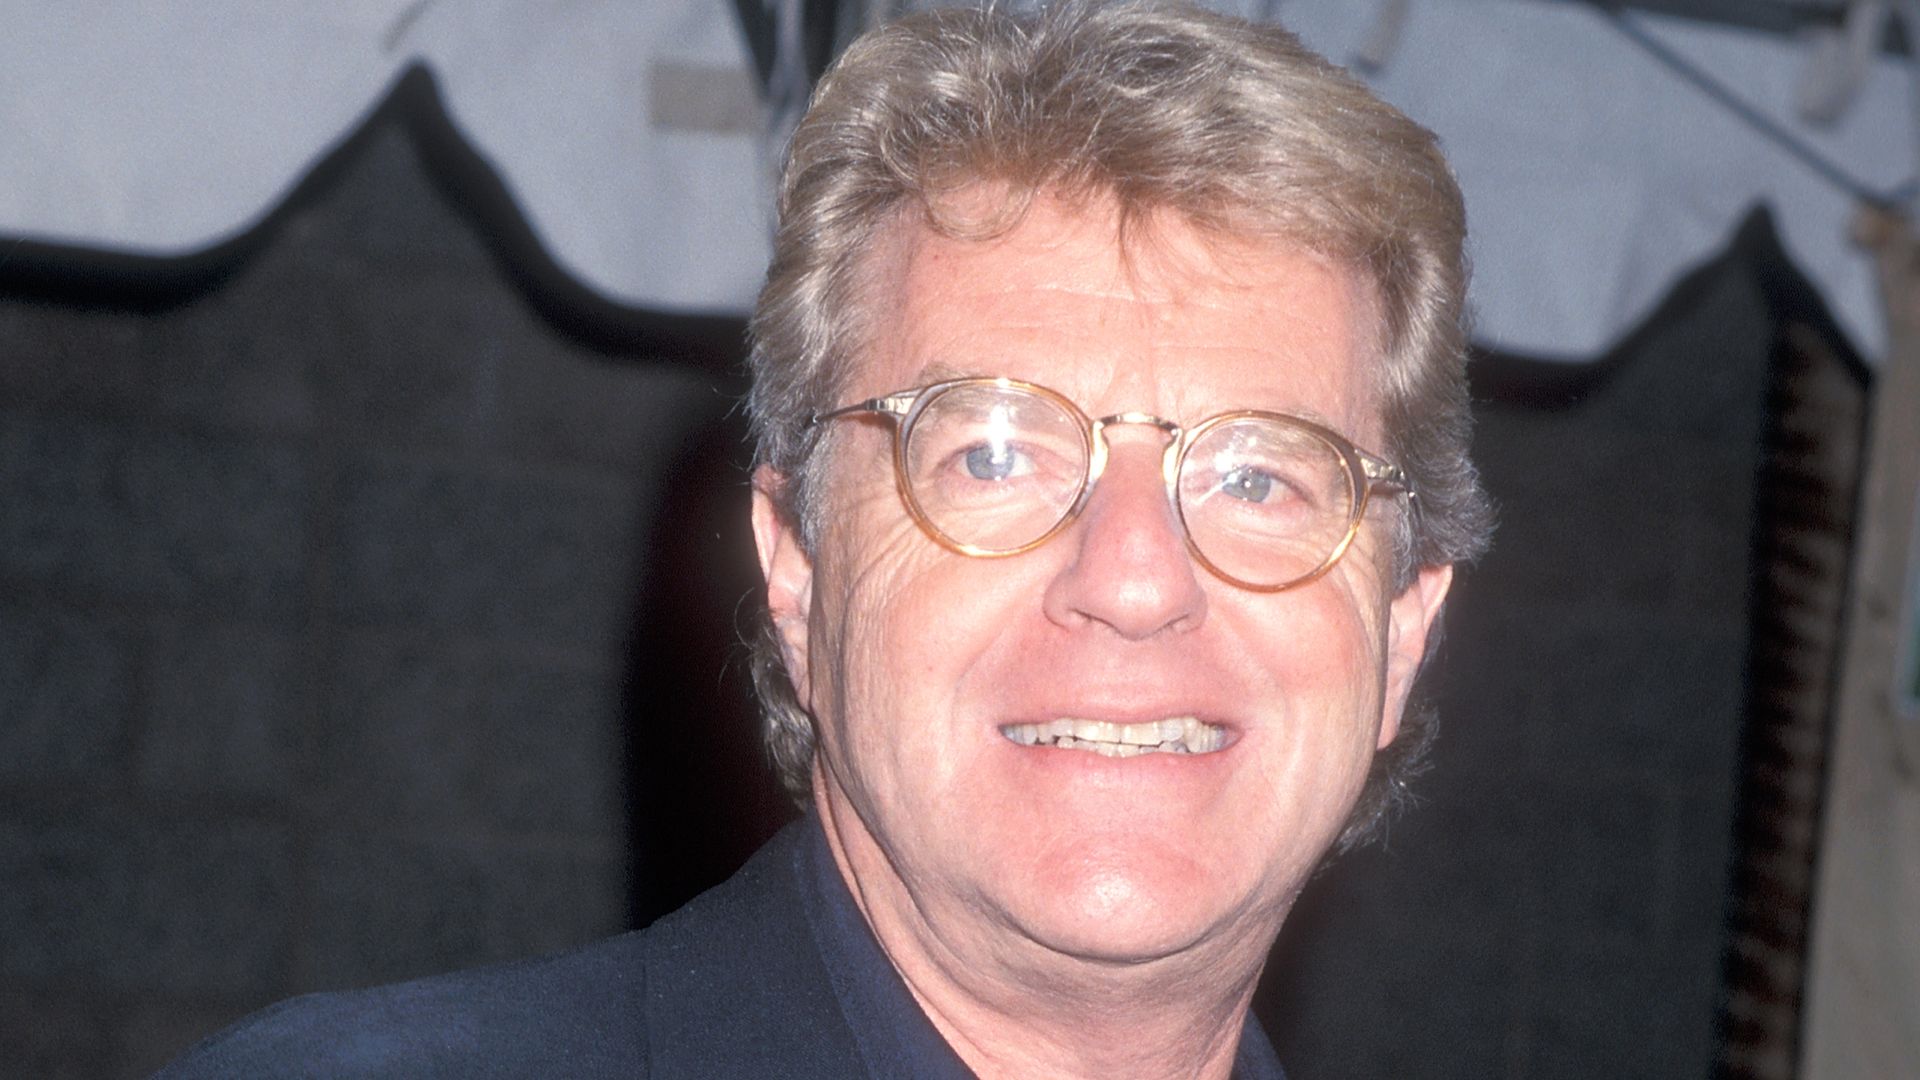 Television personality Jerry Springer attends the Ninth Annual Billboard Music Awards